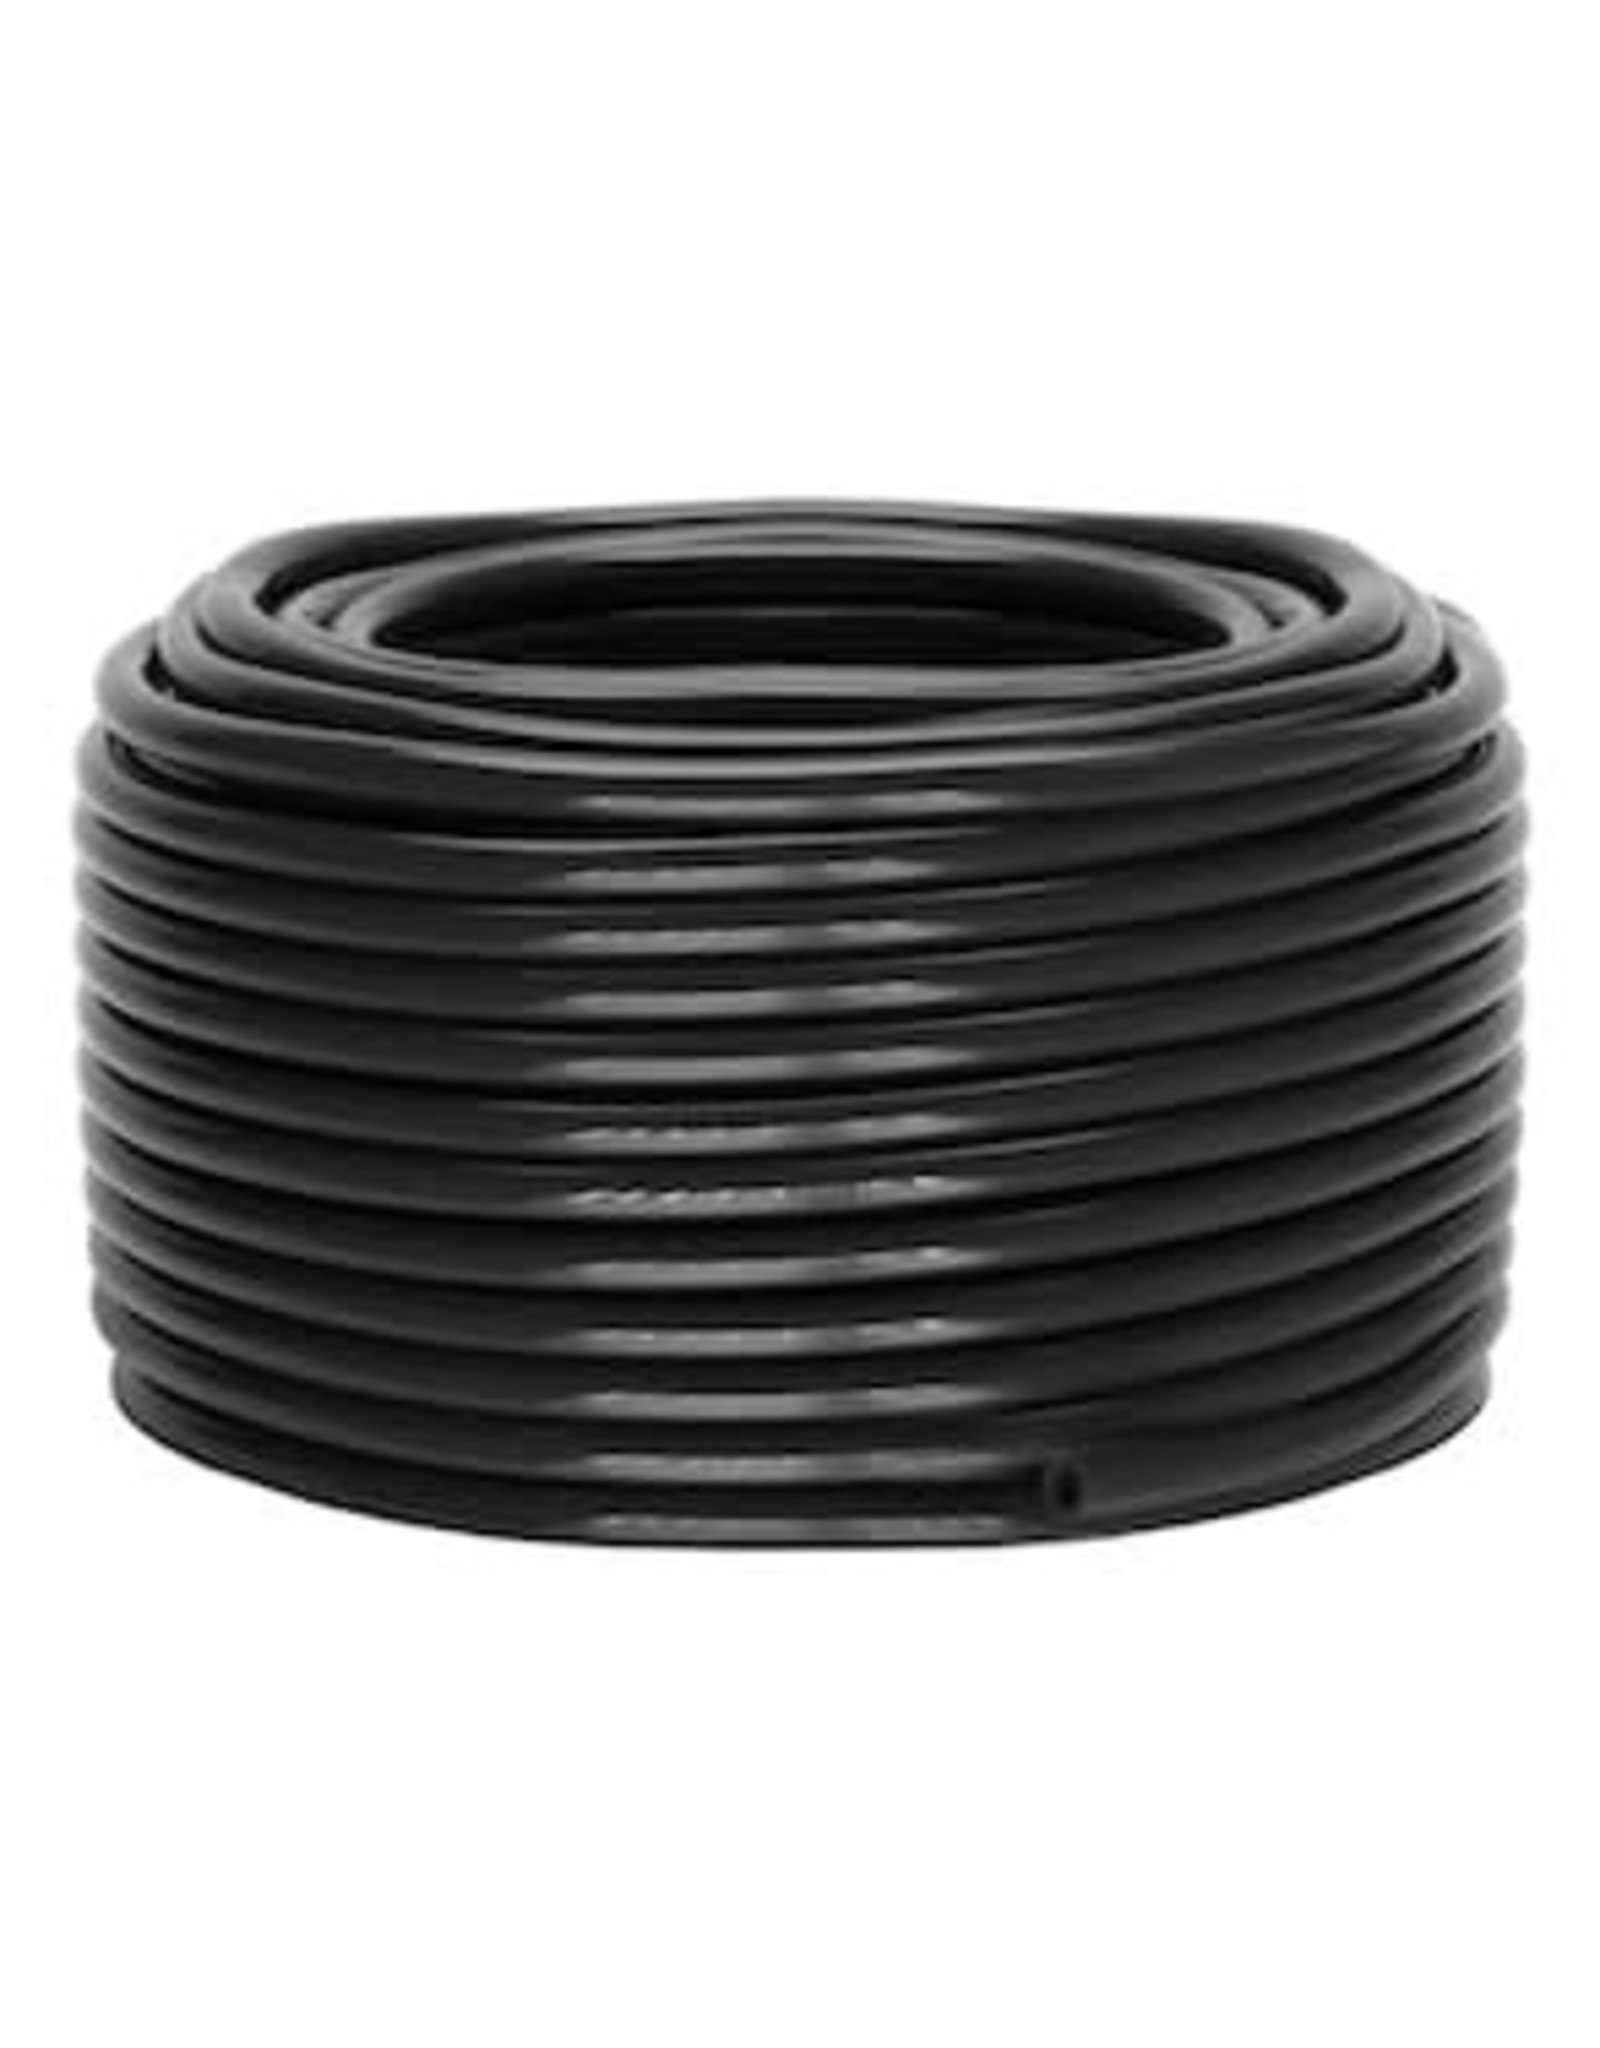 DL Wholesale Grow1 I.D. 1/2''  Black Vinyl Tubing (Sold By The Foot)